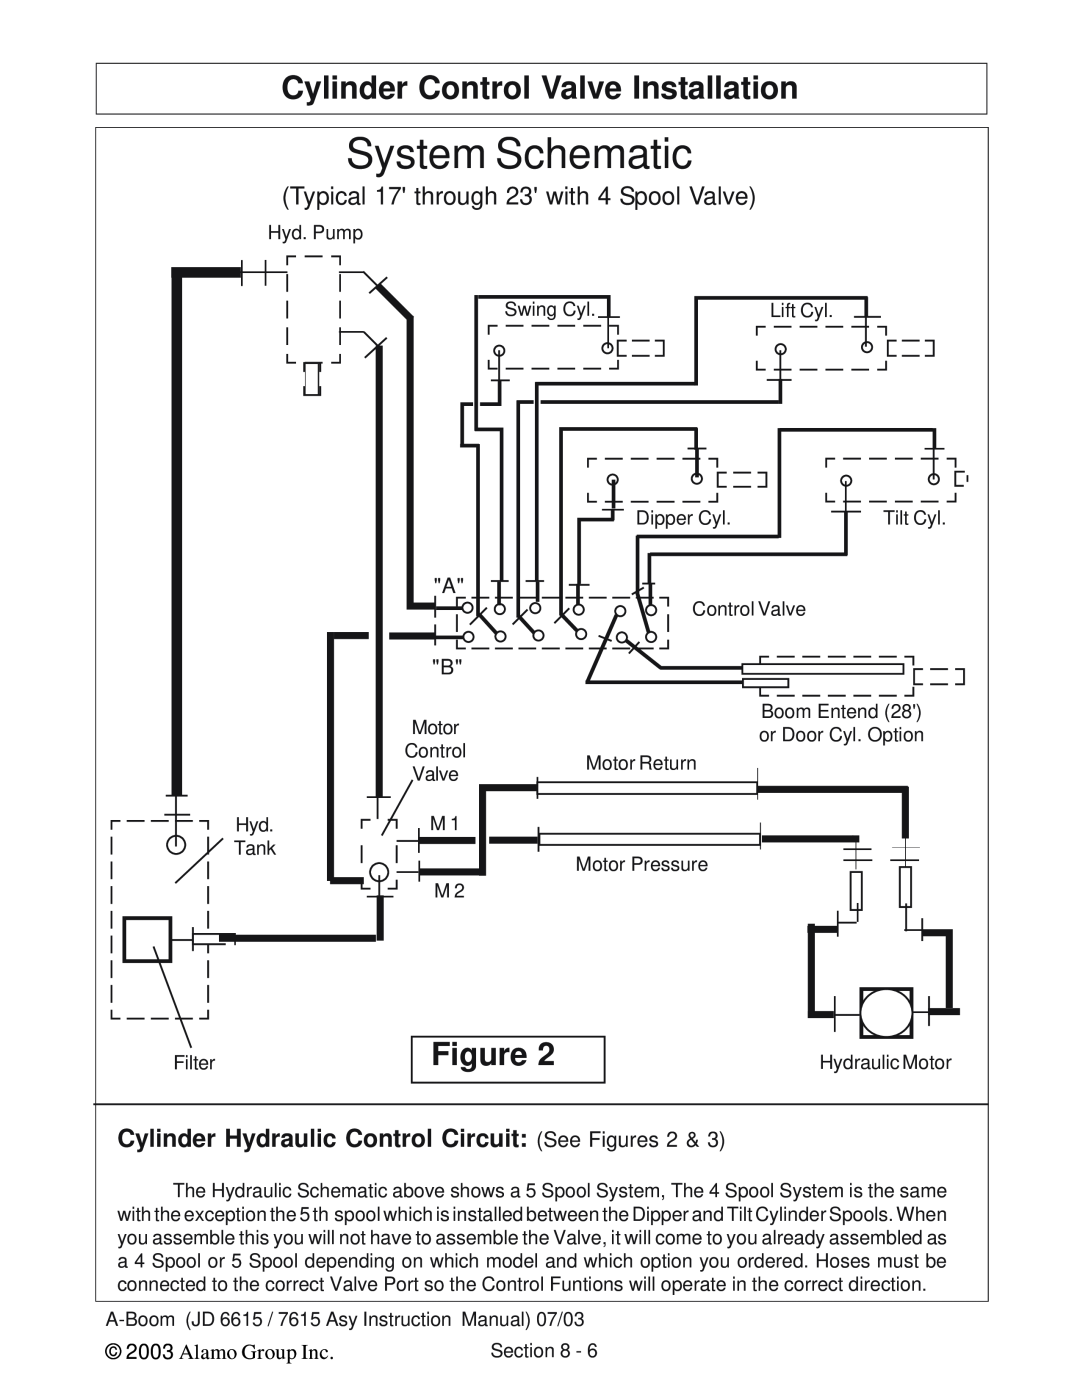 Alamo DSEB-D16 System Schematic, Cylinder Hydraulic Control Circuit See Figures 2, Cylinder Control Valve Installation 